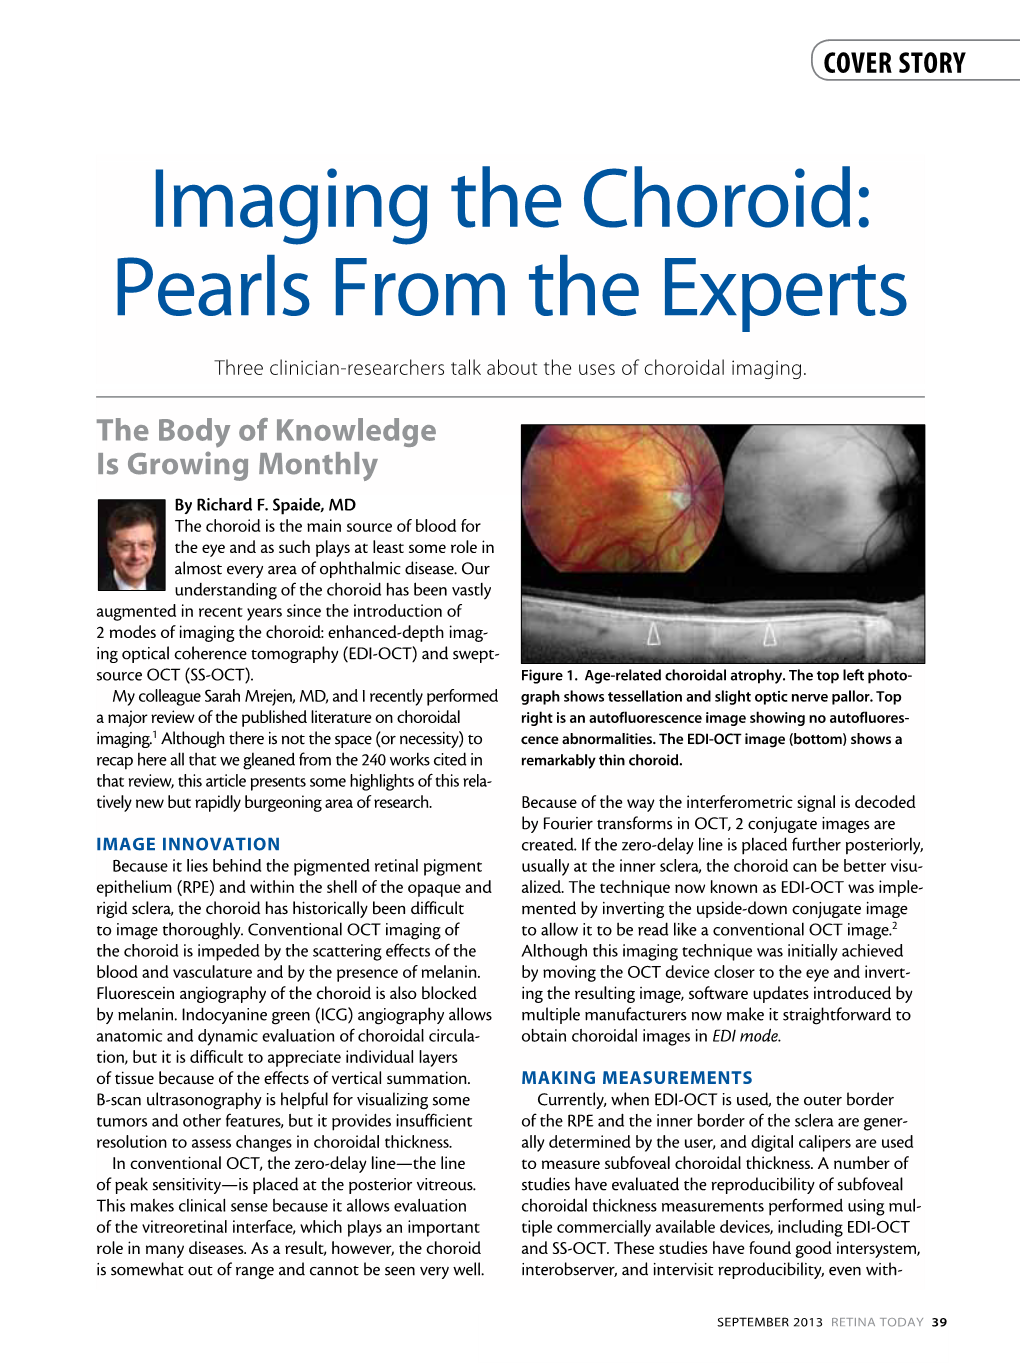 Imaging the Choroid: Pearls from the Experts